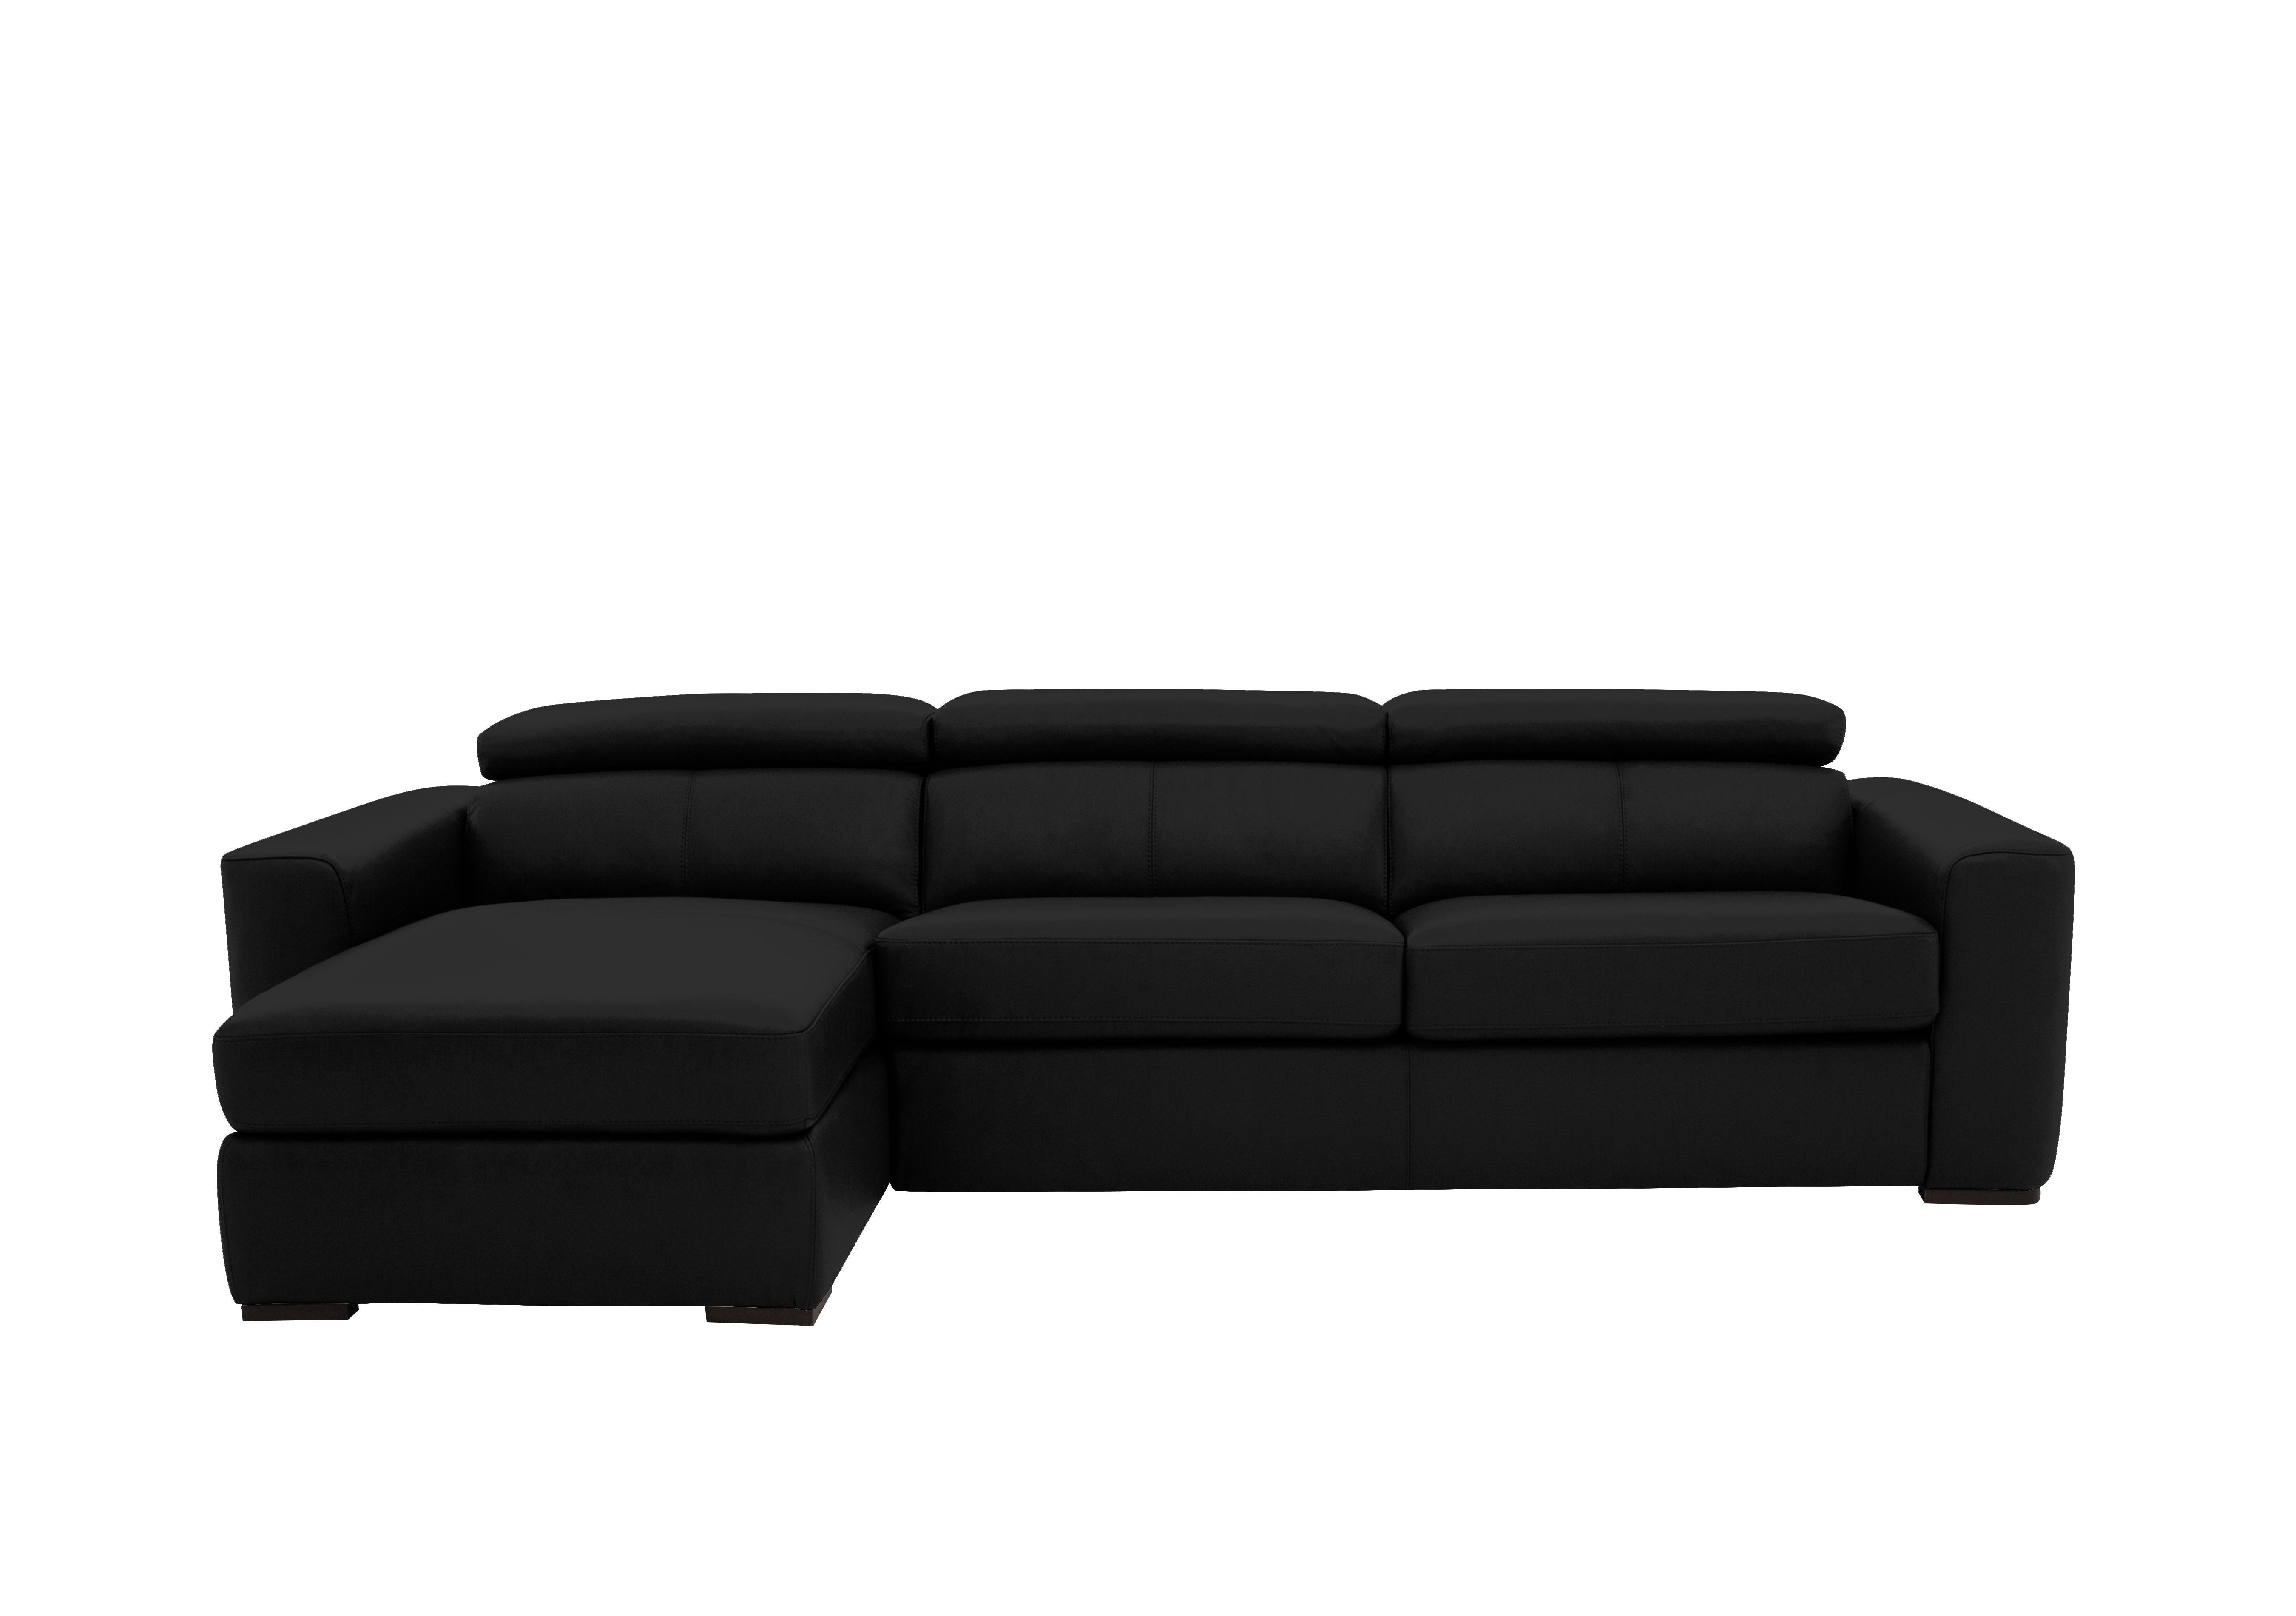 Infinity Leather Corner Chaise Sofa with Storage in Bv-3500 Classic Black on Furniture Village